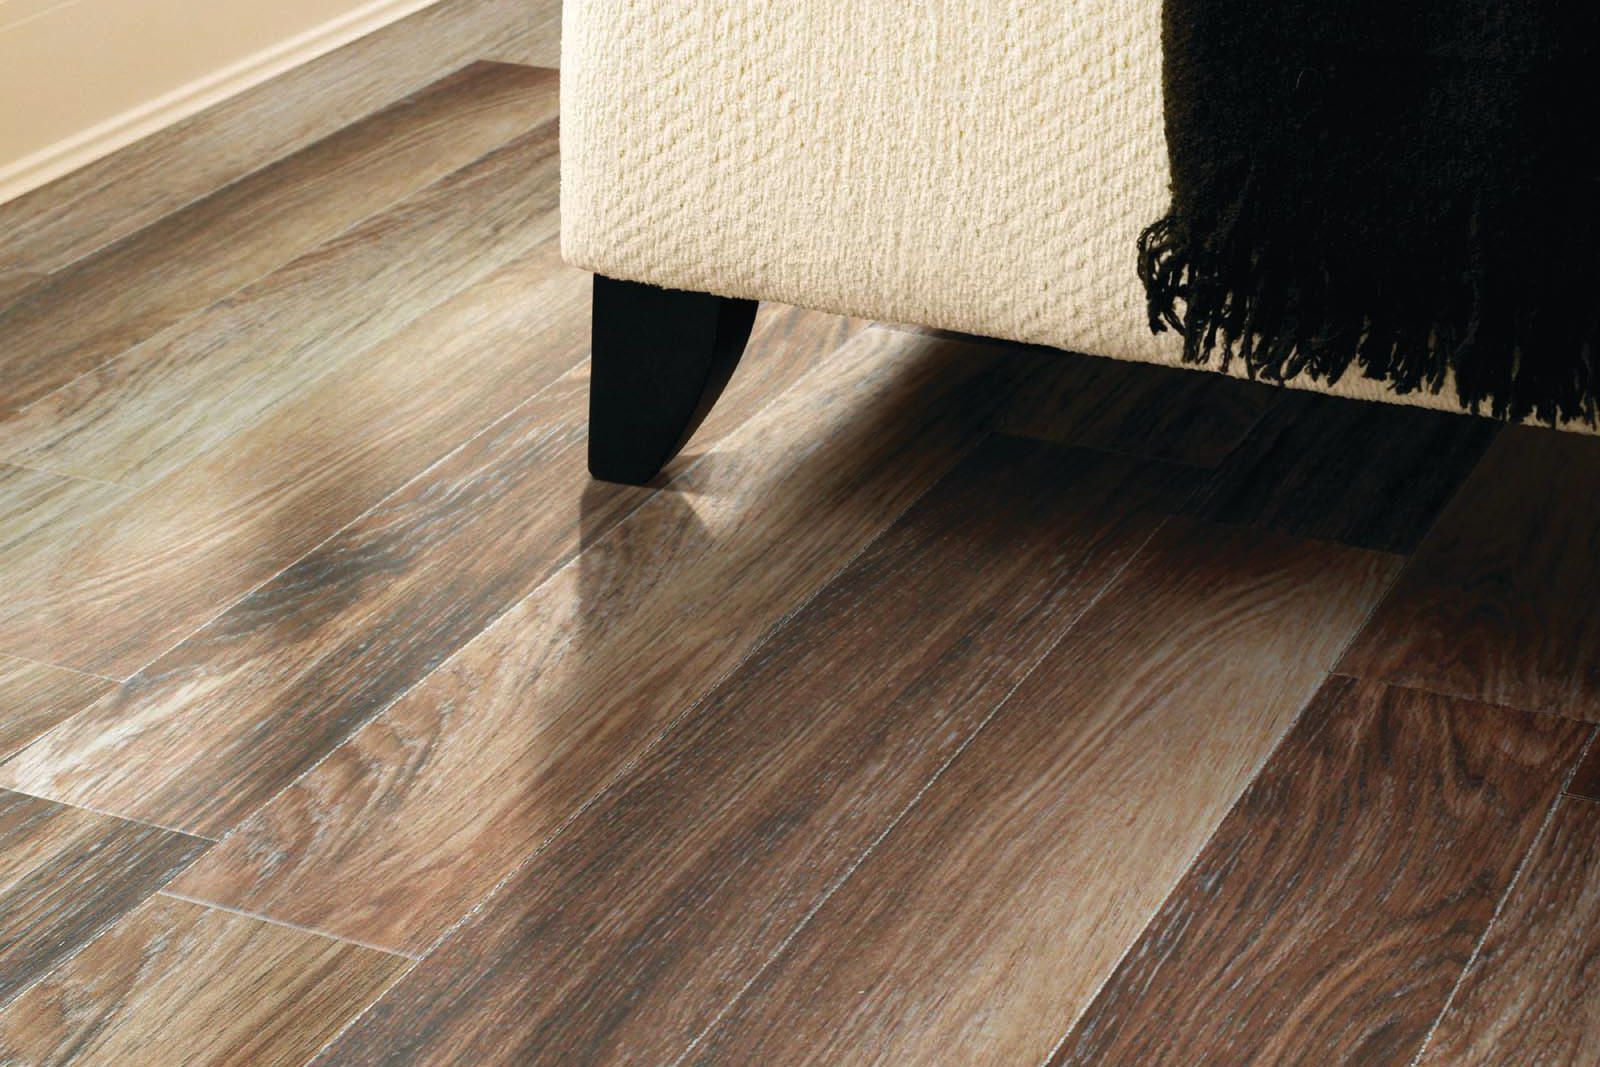 19 attractive Hardwood Floors Vs Porcelain Tile 2024 free download hardwood floors vs porcelain tile of mediterranea the warm look of wood combines with the cool touch of with regard to sandal wood porcelain tile in palm by mediterranea usa